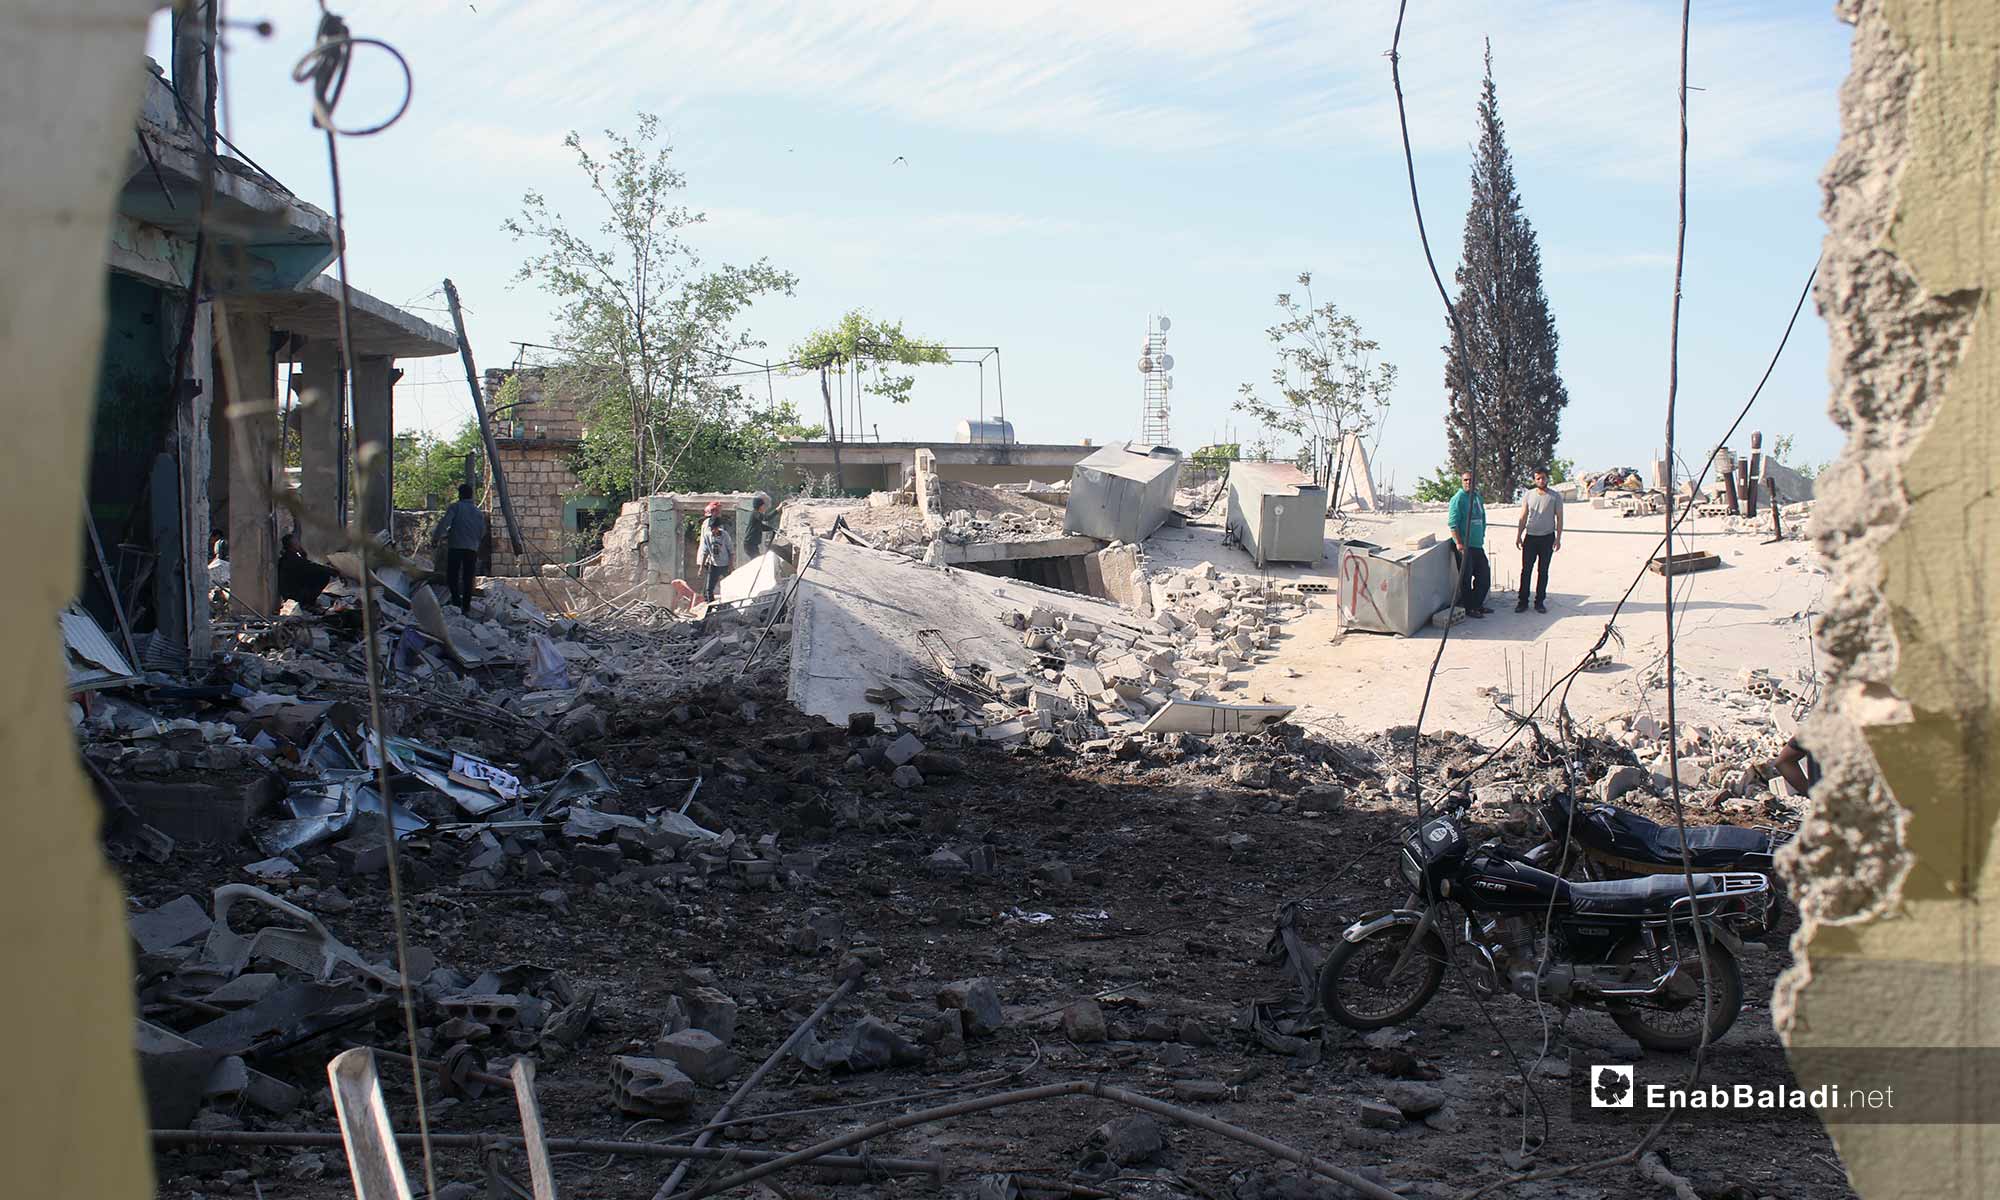 The destruction caused by the shelling of the village of Abadeta, rural Idlib – May 3, 2019 (Enab Baladi)